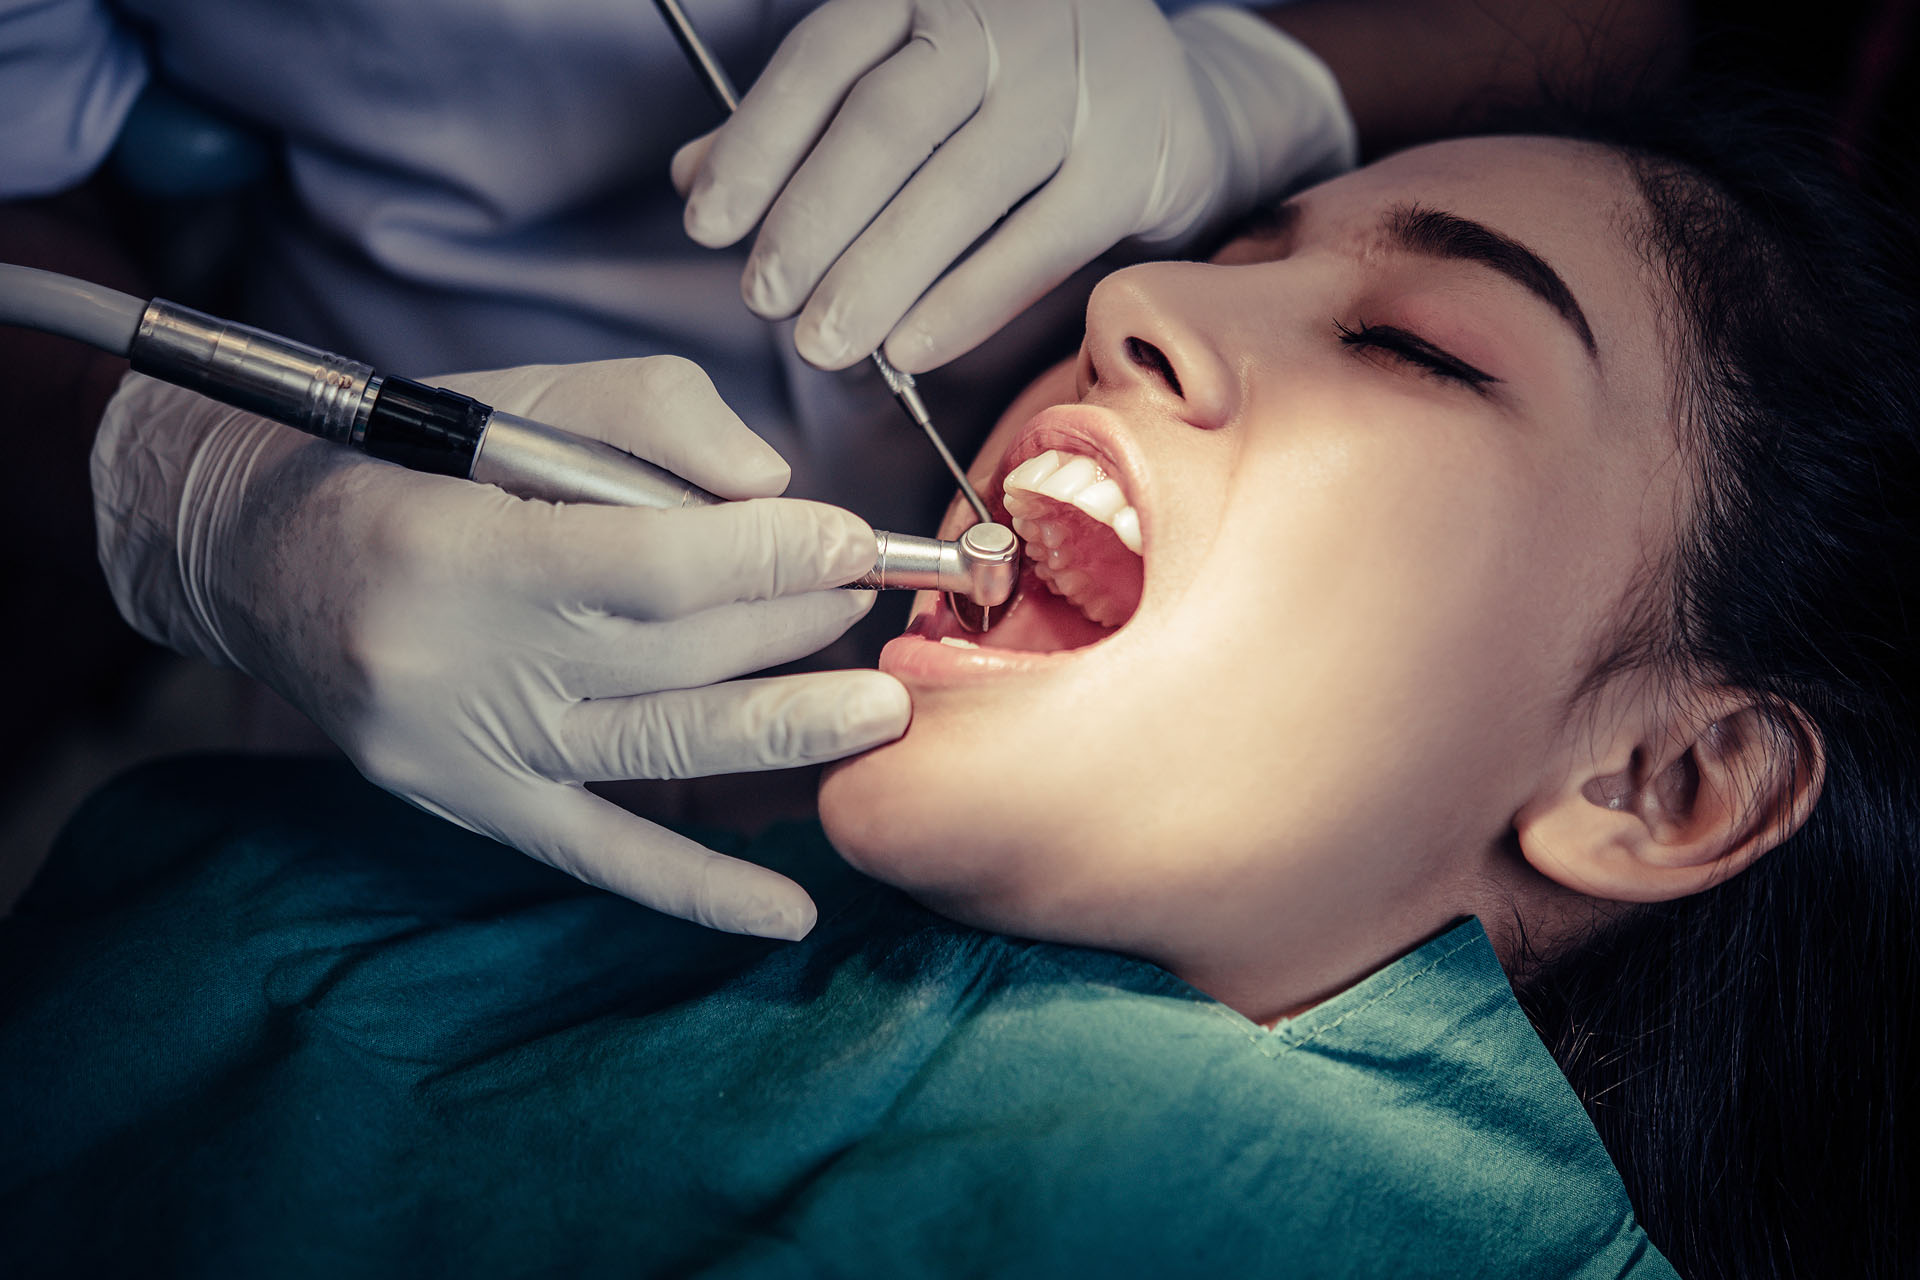 https://shifadentalclinic.in/wp-content/uploads/2020/01/featured-_image-root-_canal-_-treatment.jpg